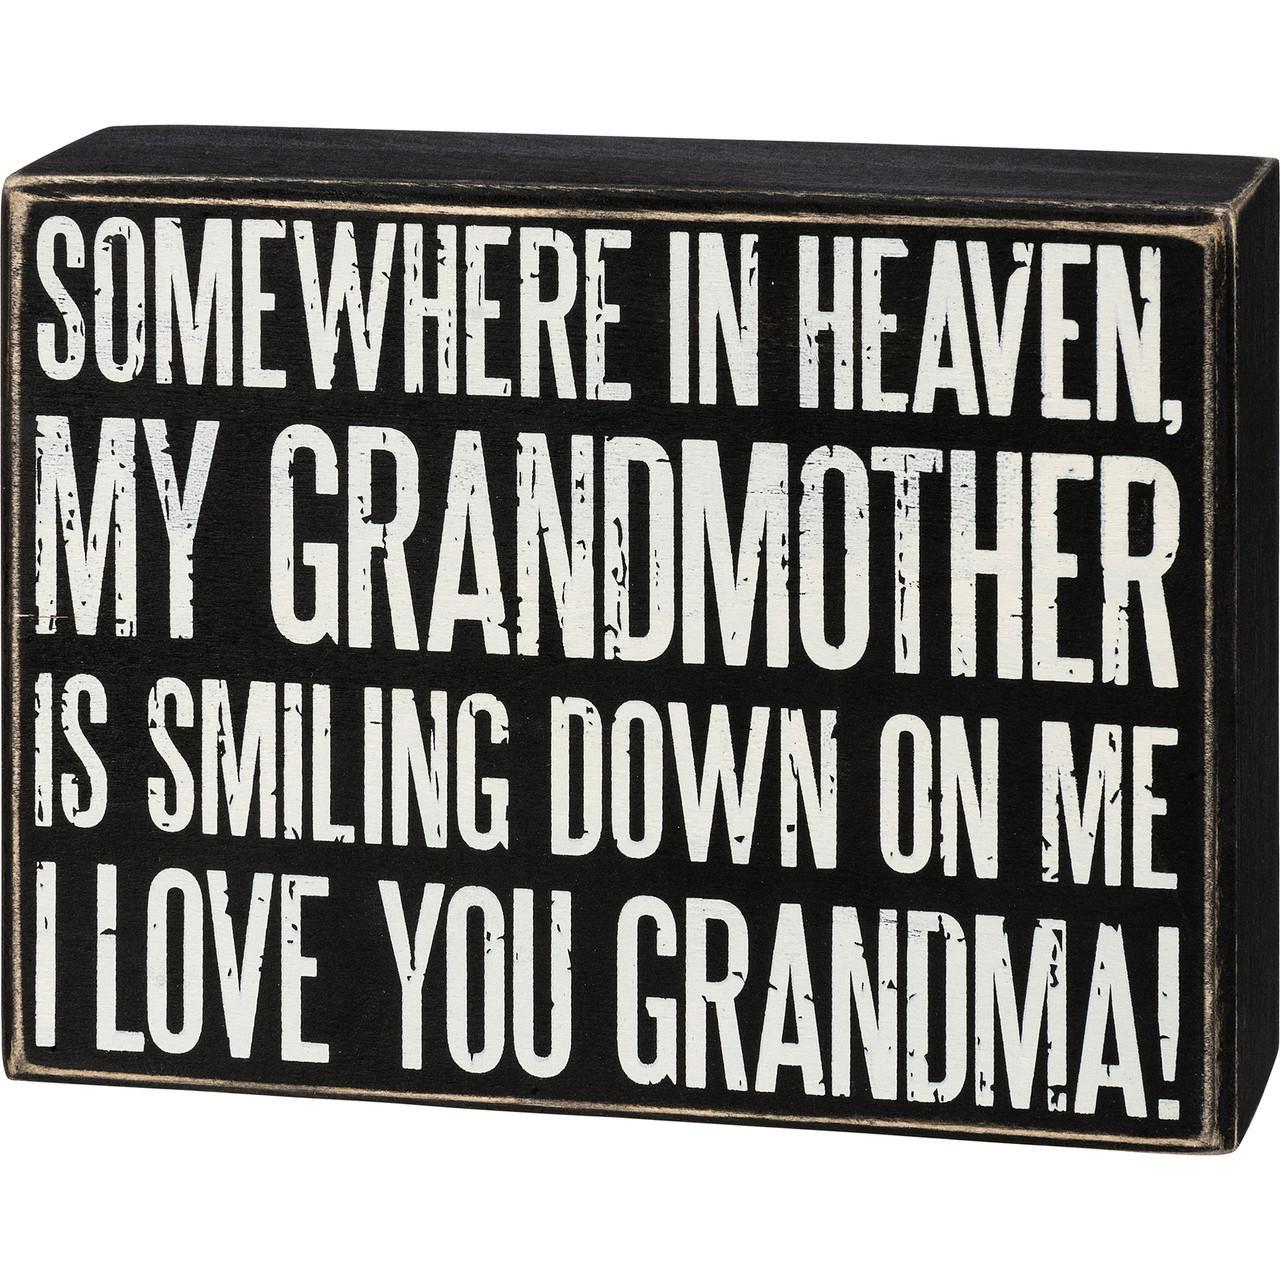 Somewhere In Heaven, My Grandmother Is Smiling Down On Me I Love You Grandma!